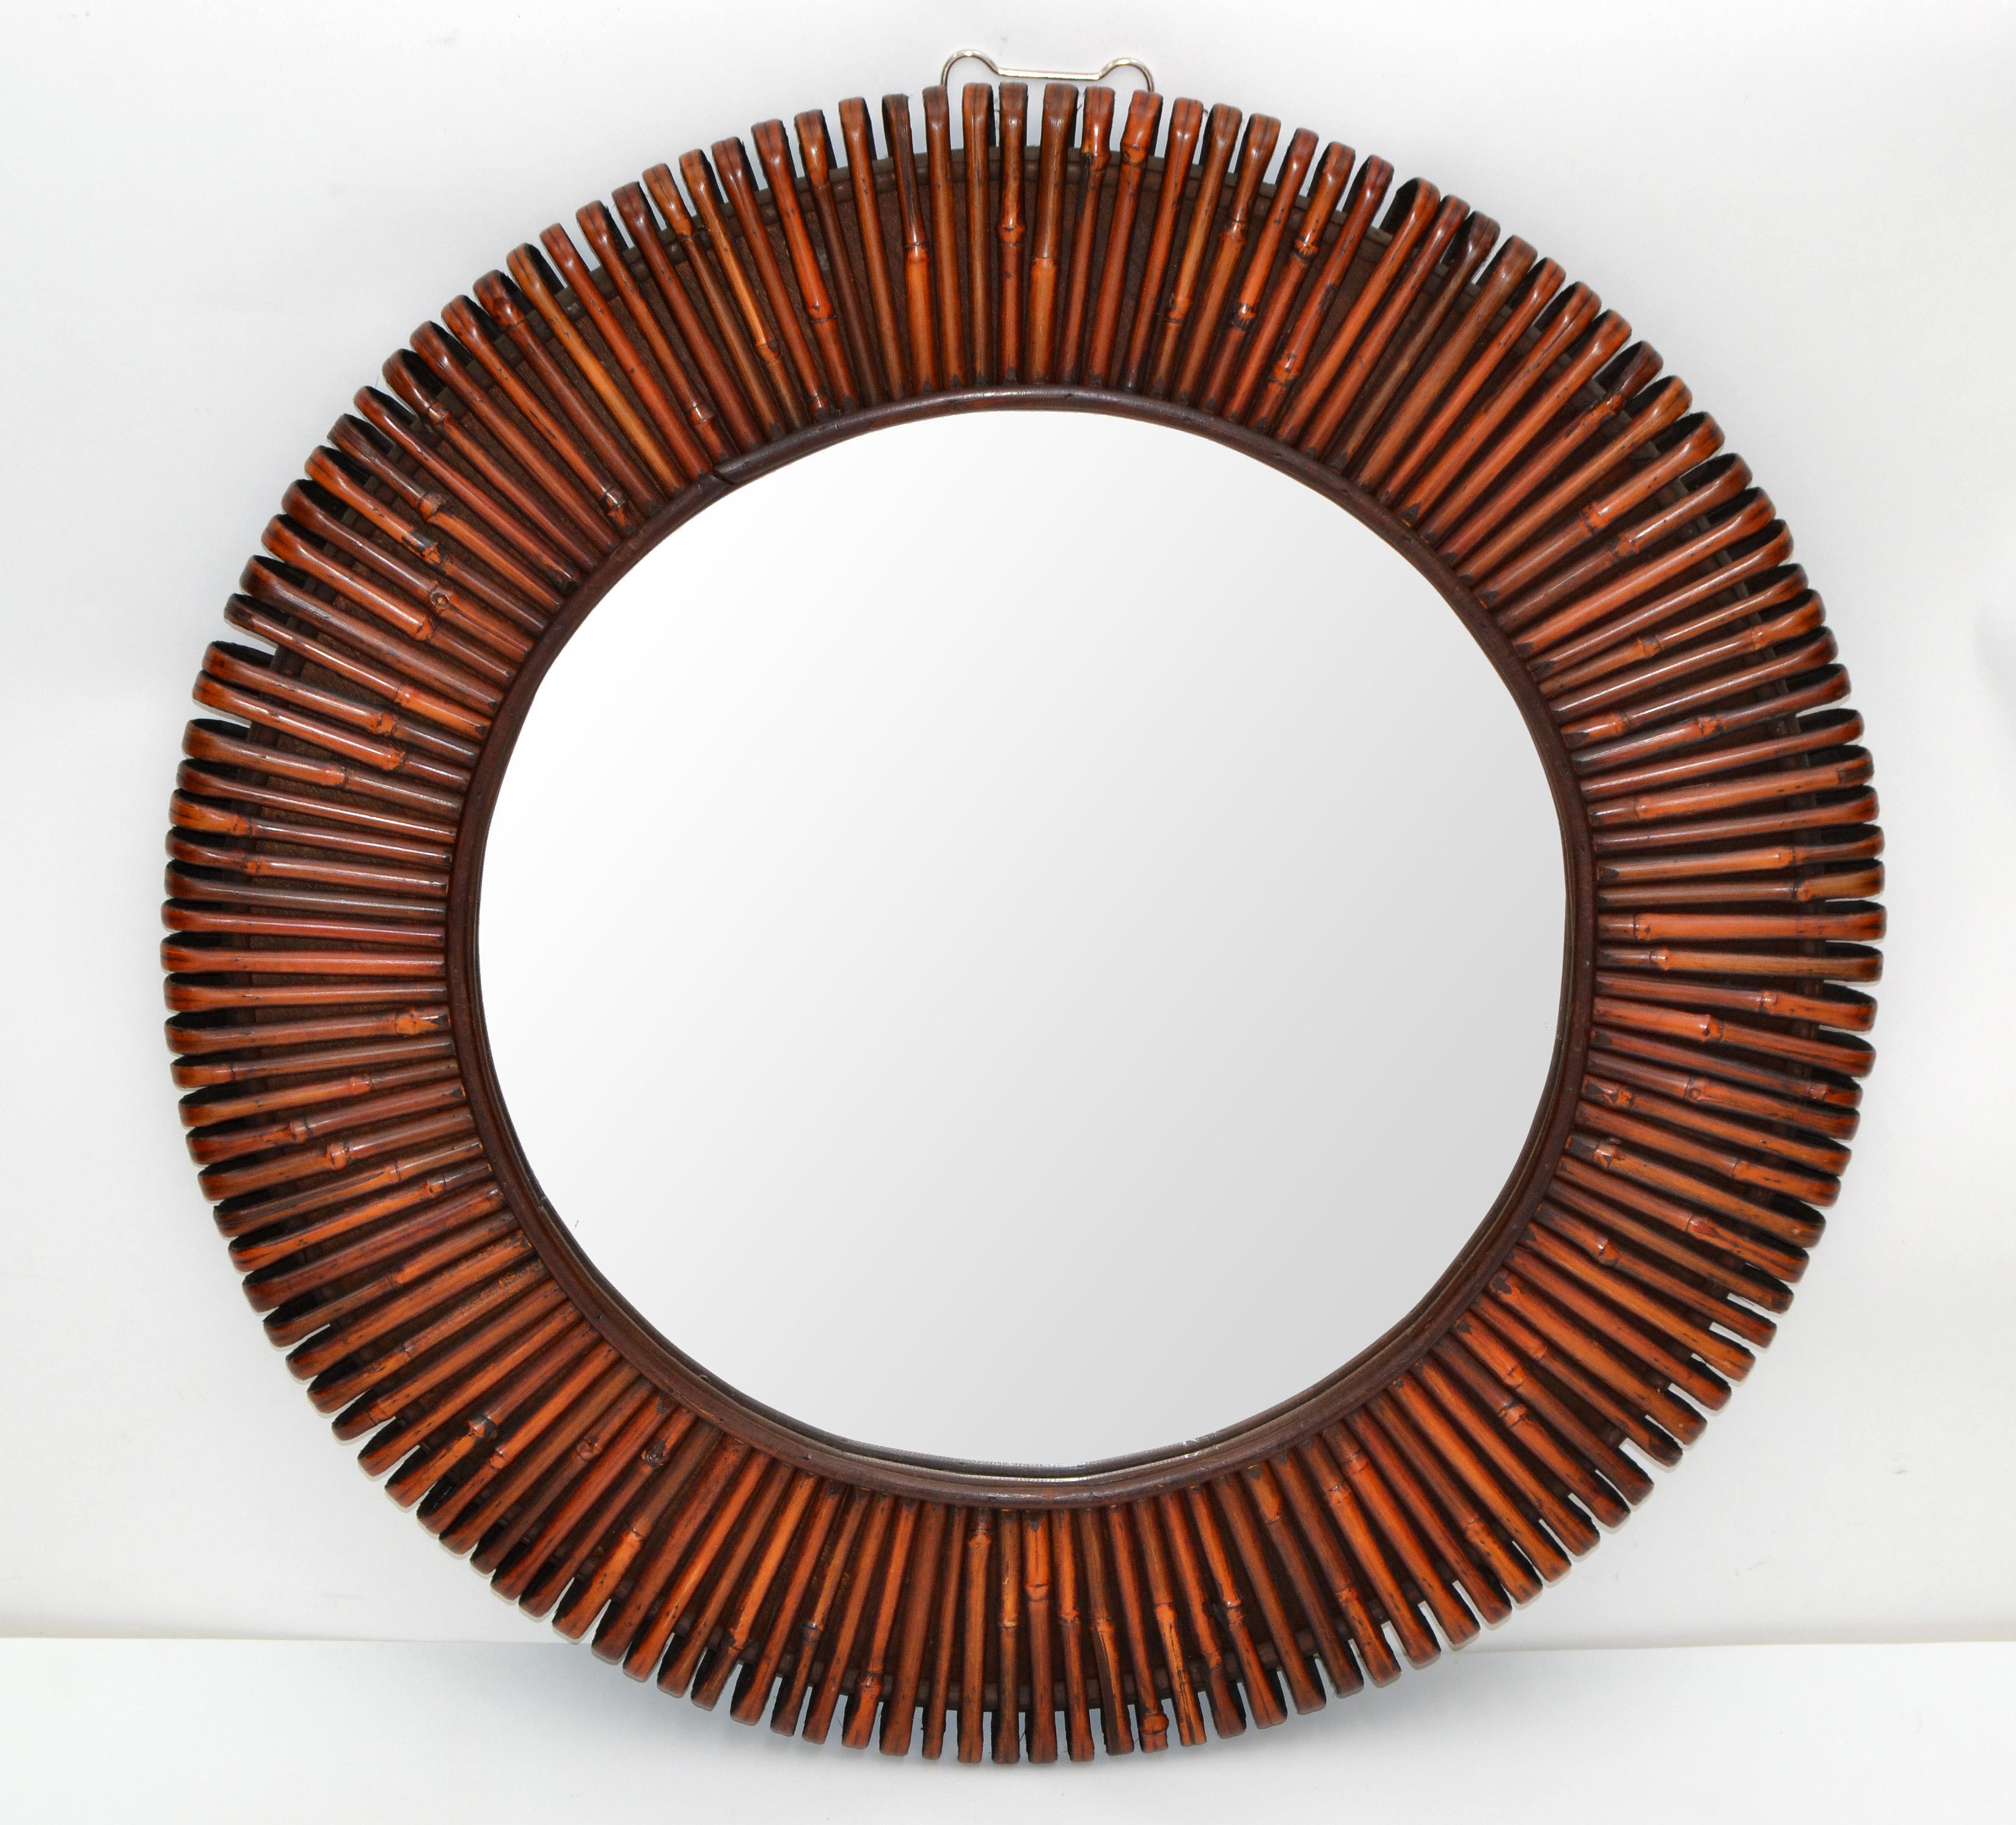 Contemporary Handcrafted Round Bent Rattan and Wood Mirror 1